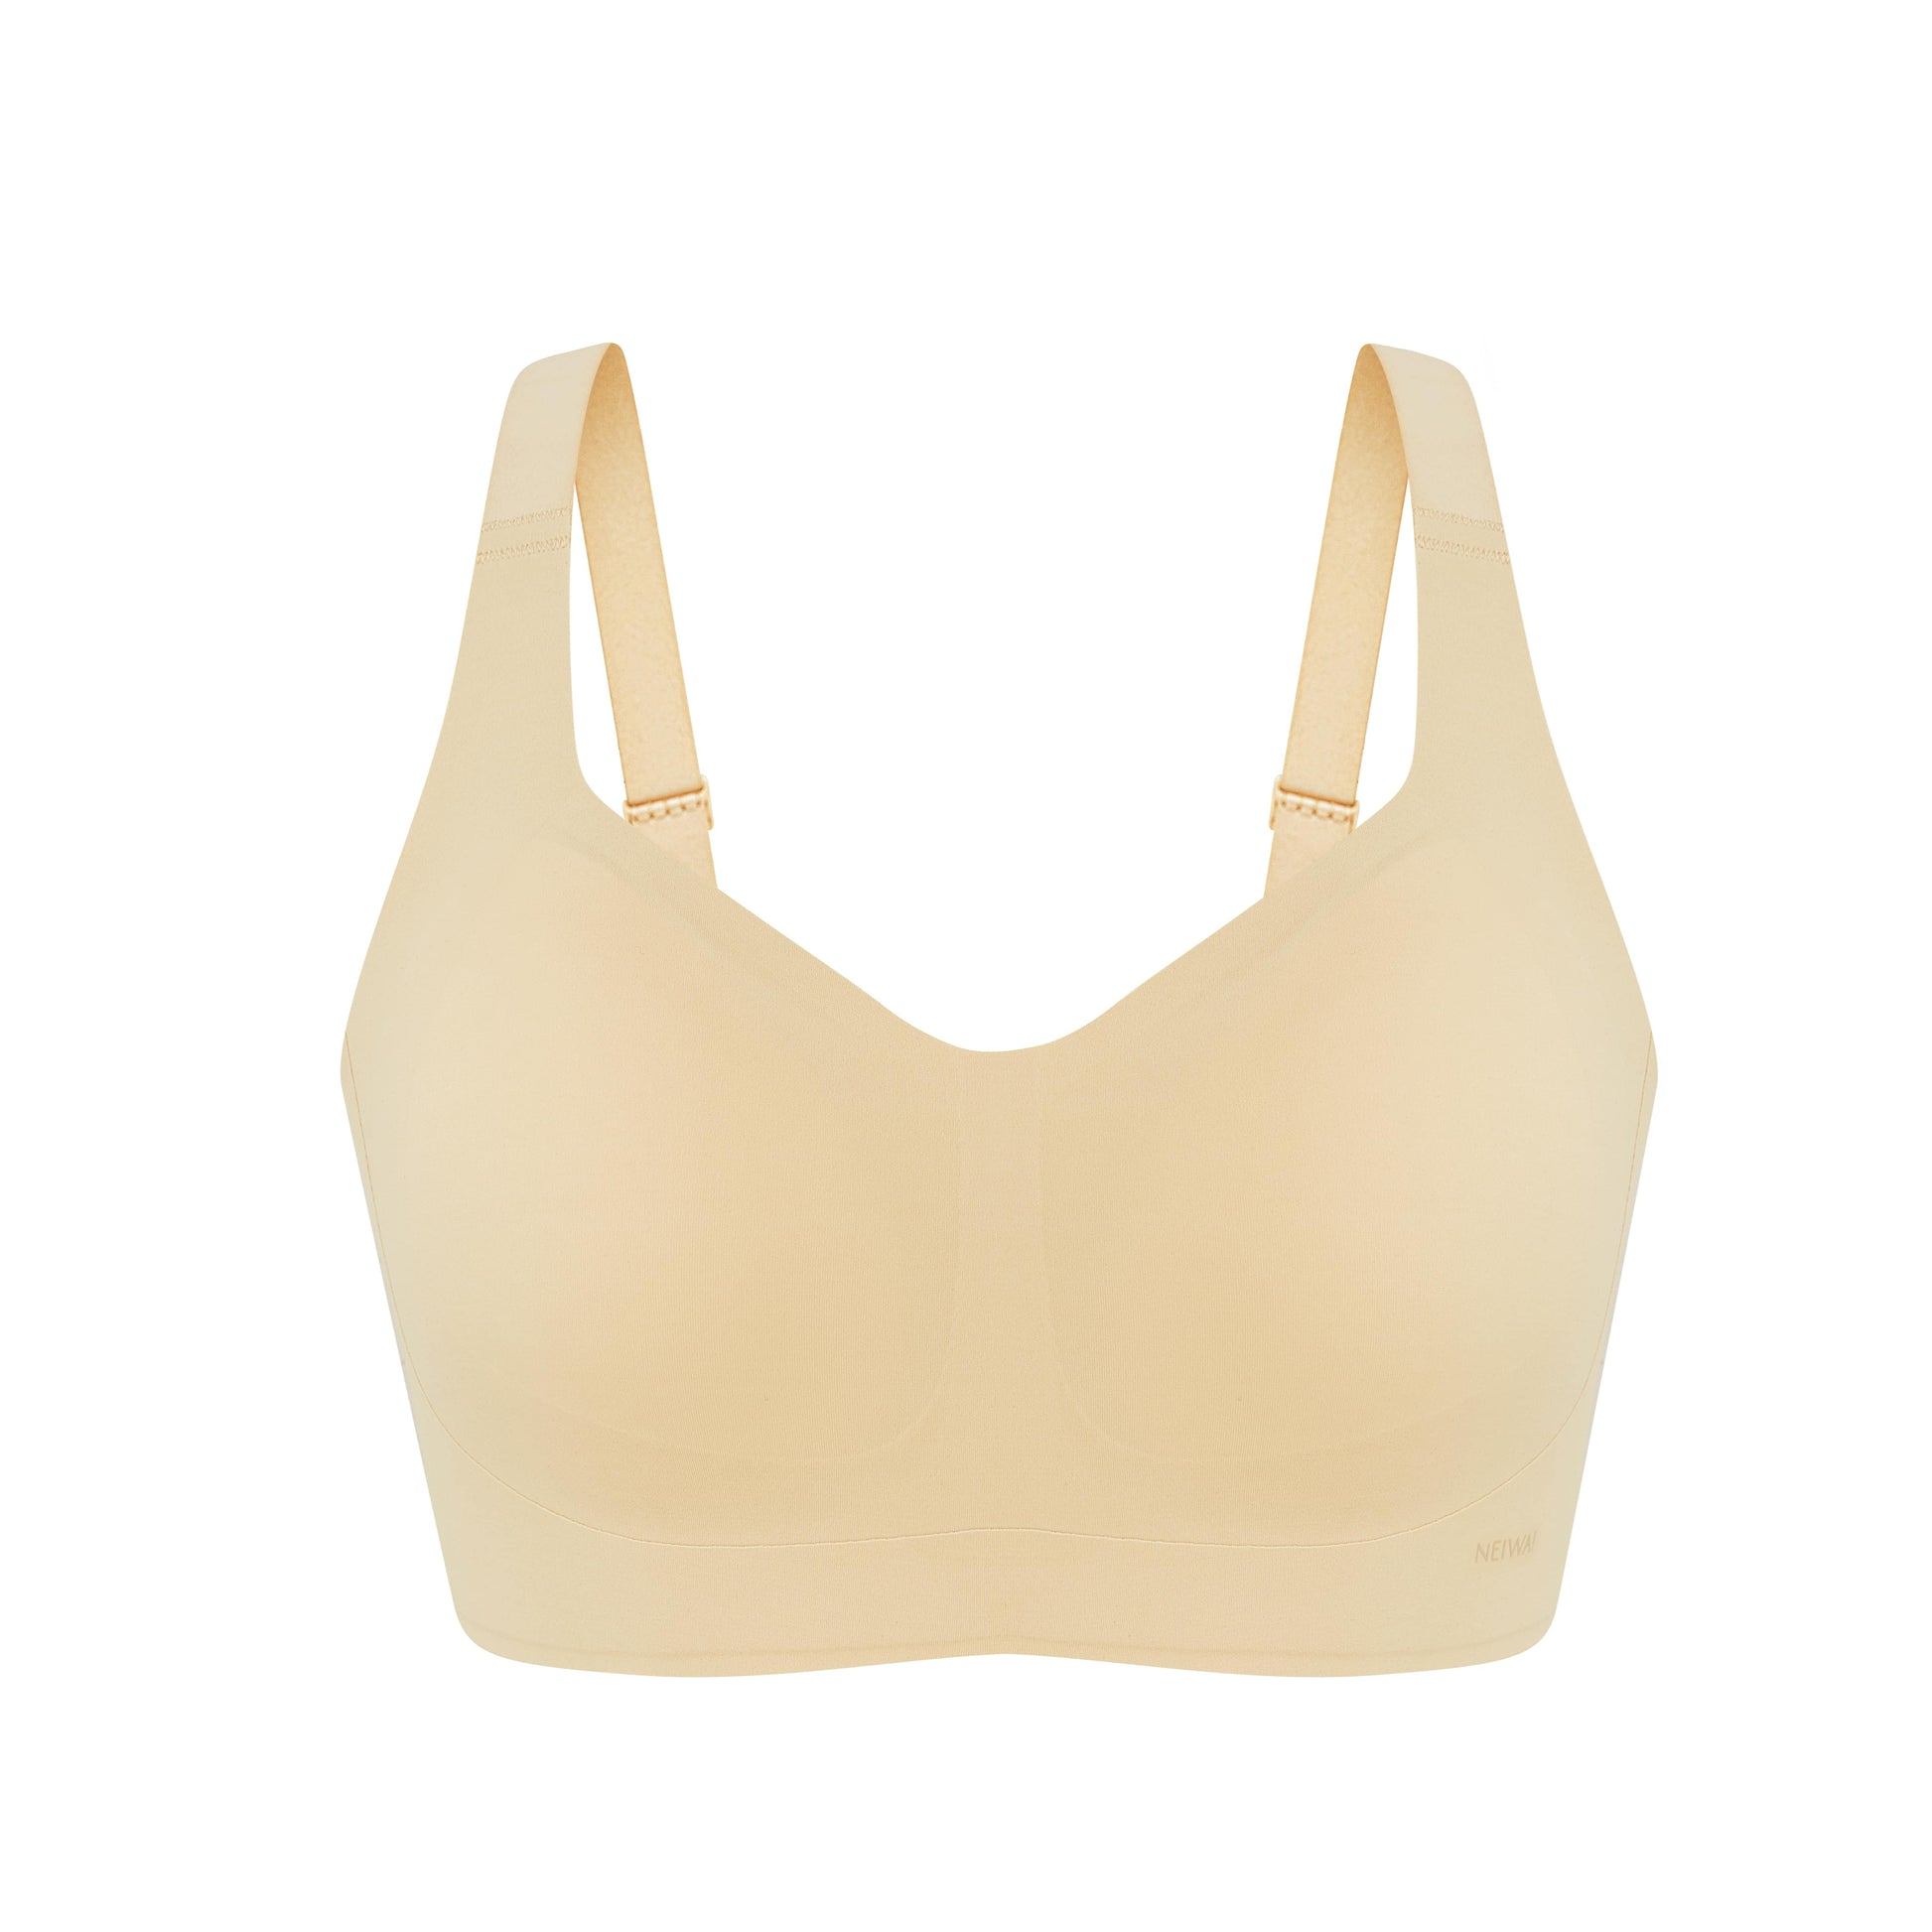 Kwatieh Full Support Bras for Women Non Wire Seamless Comfortable